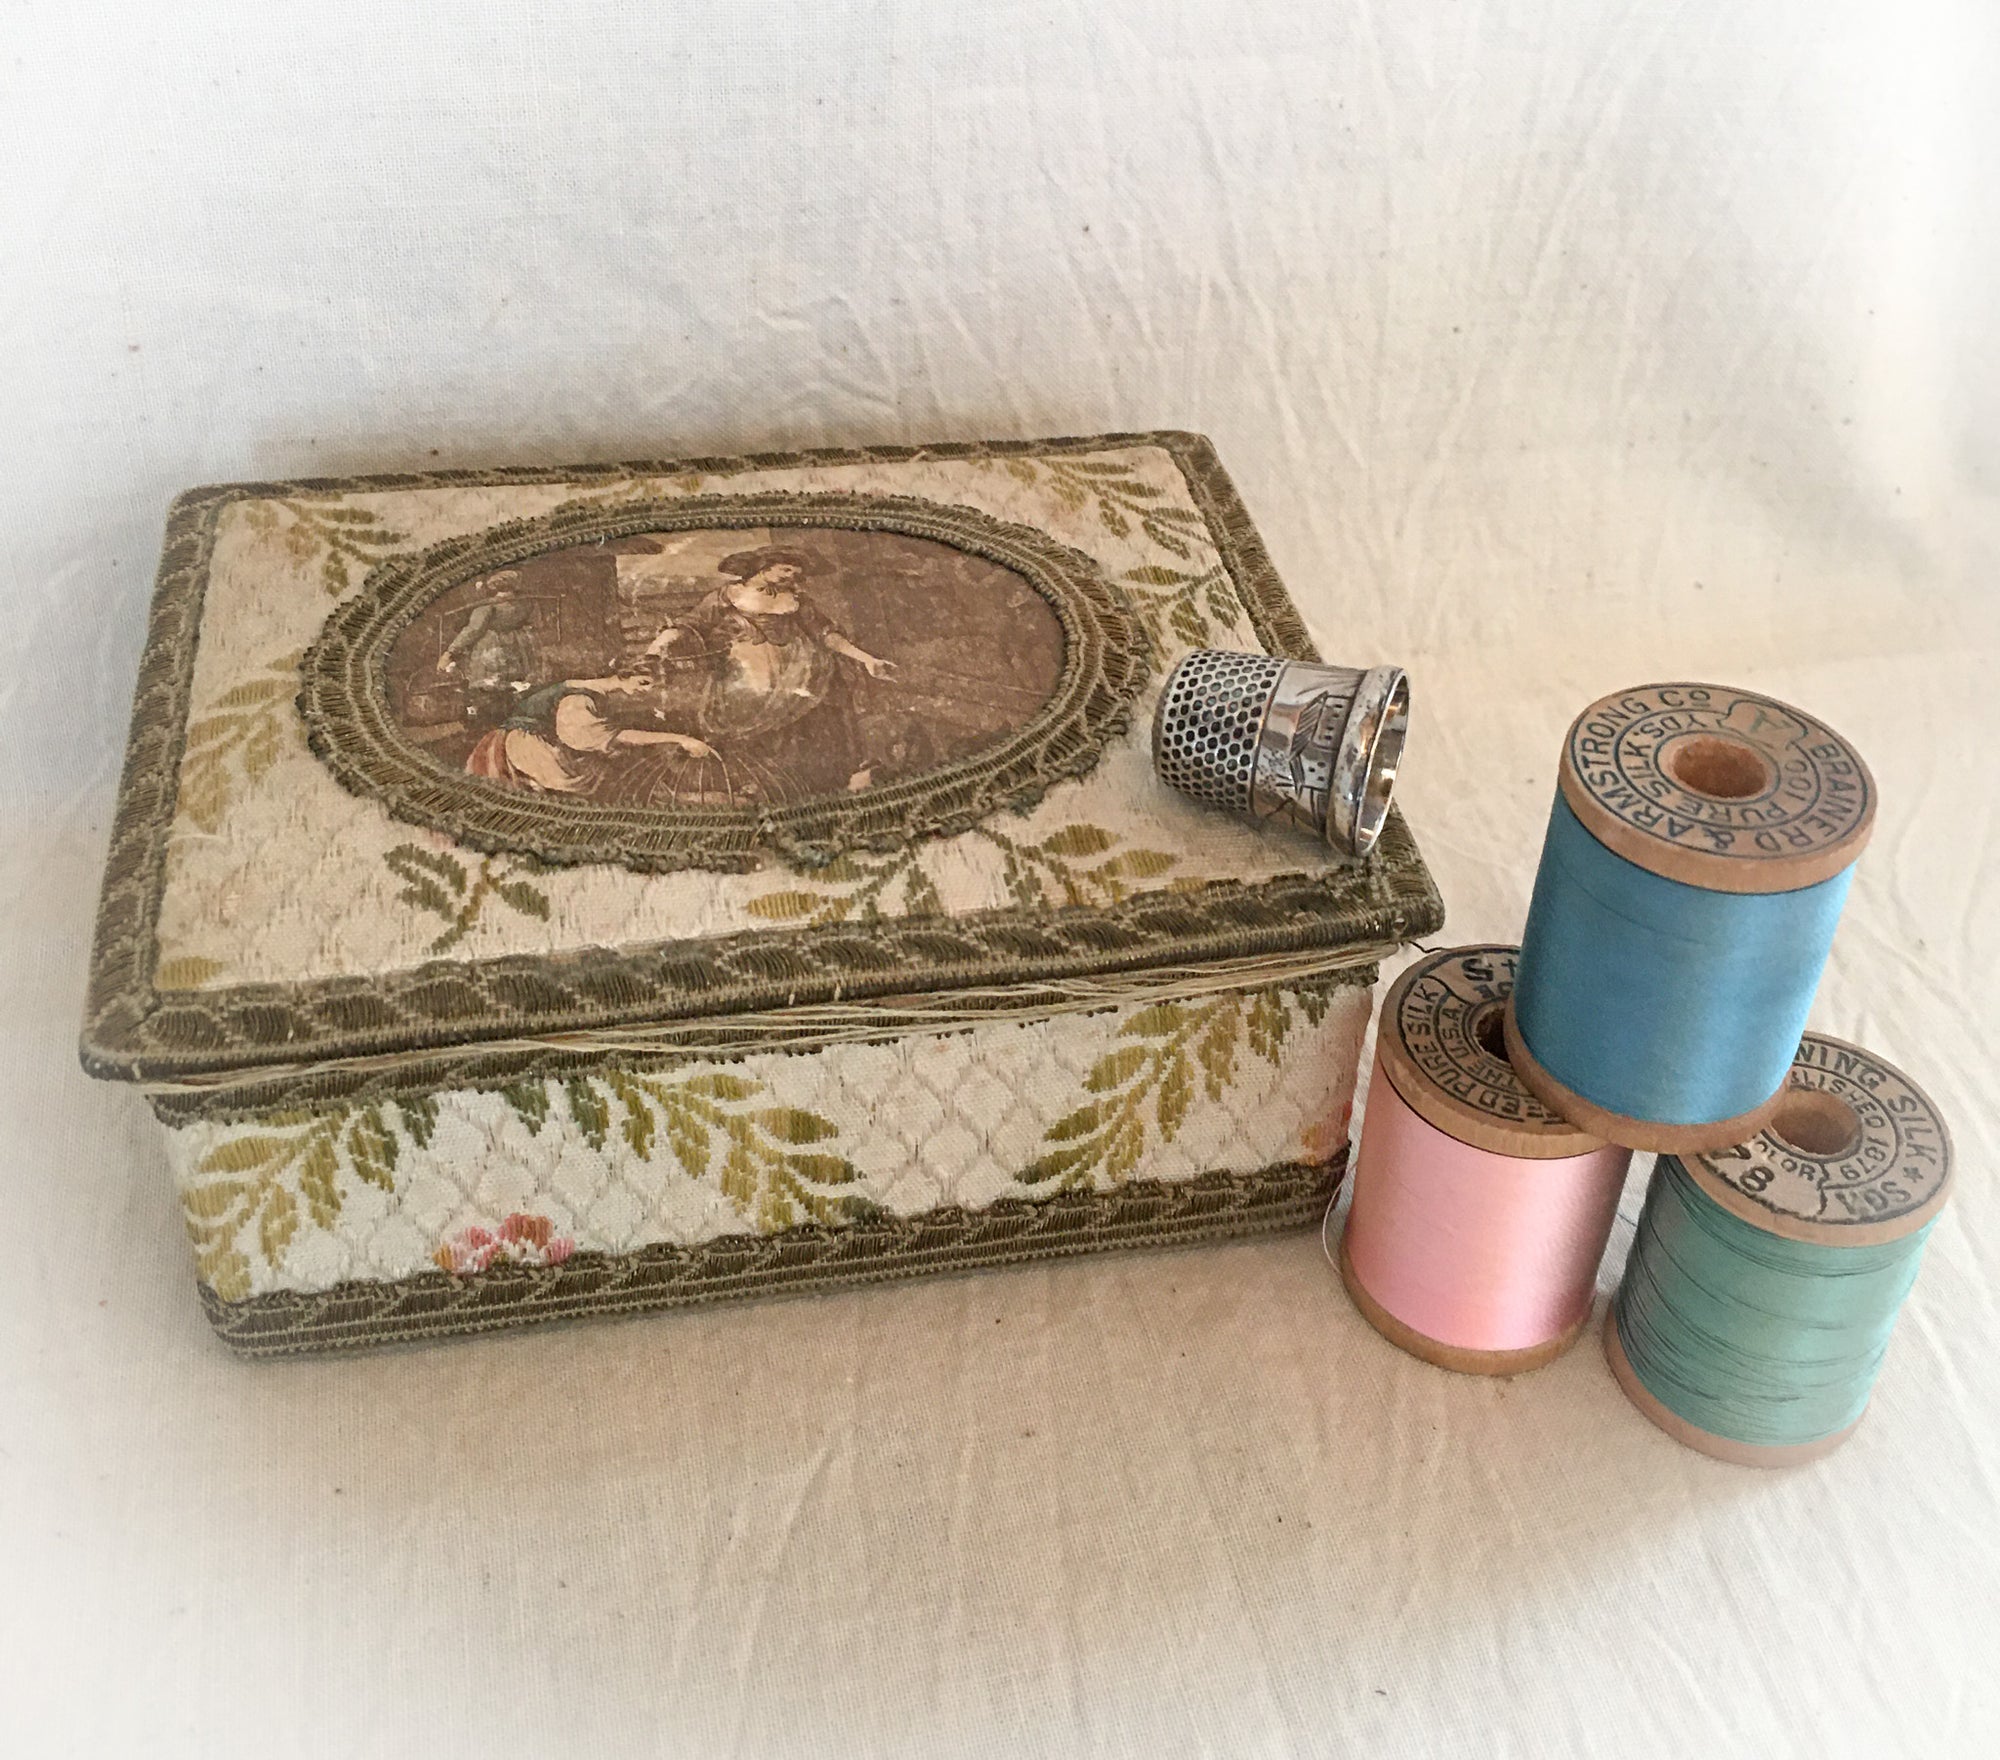 Vintage Keepsake Box with Shell and Porcelain Buttons